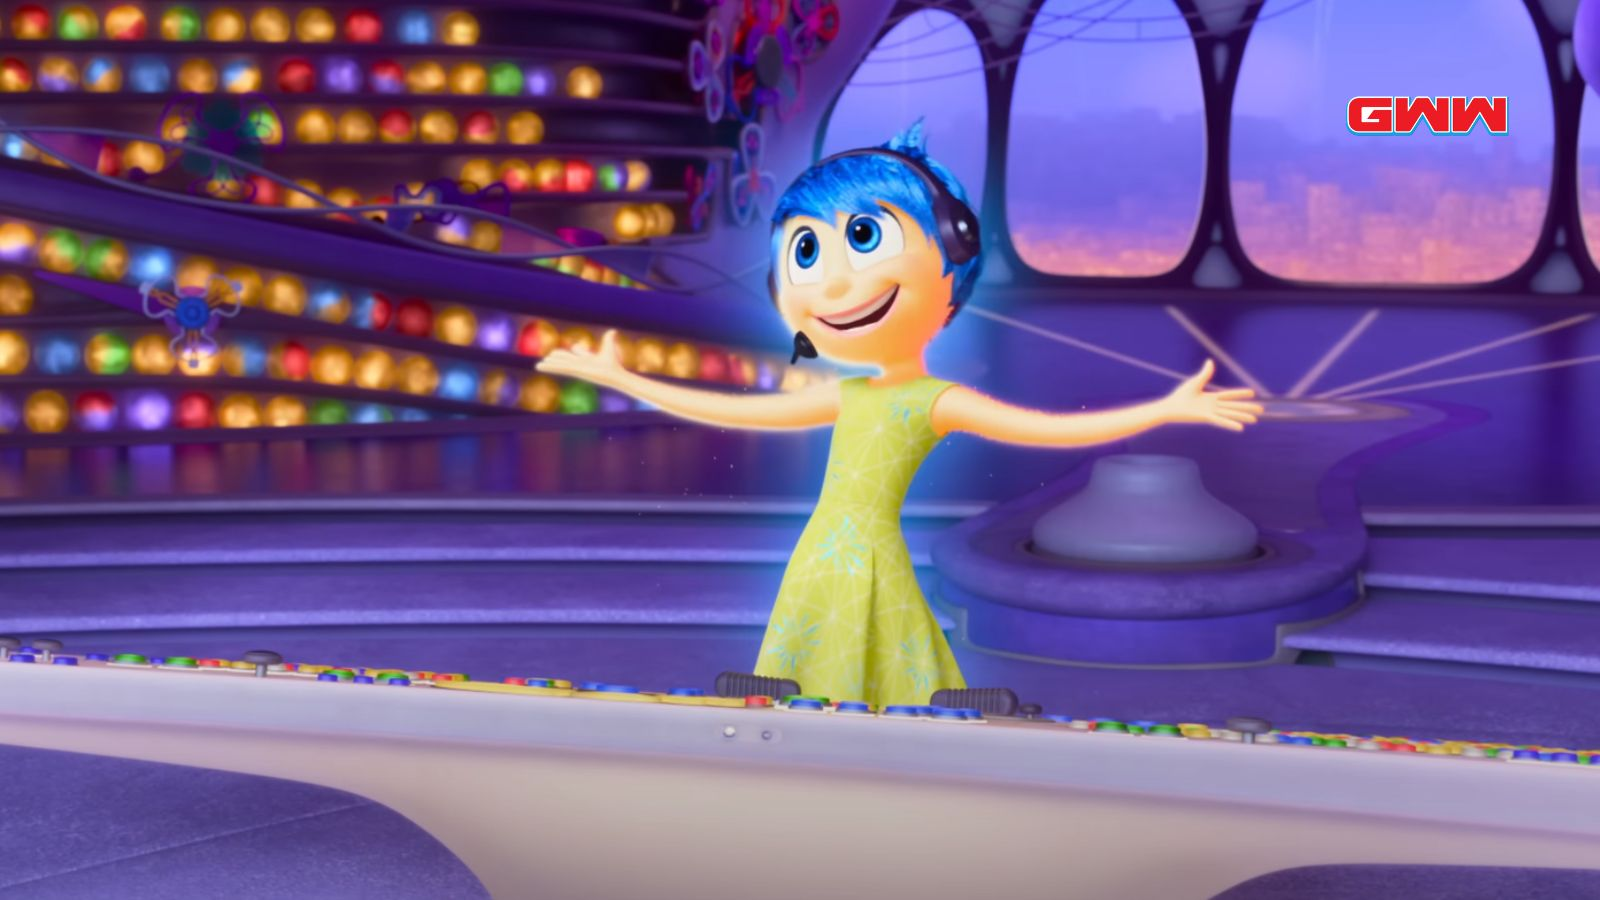 A Poster for the movie 'Inside Out' with the character named "Joy".